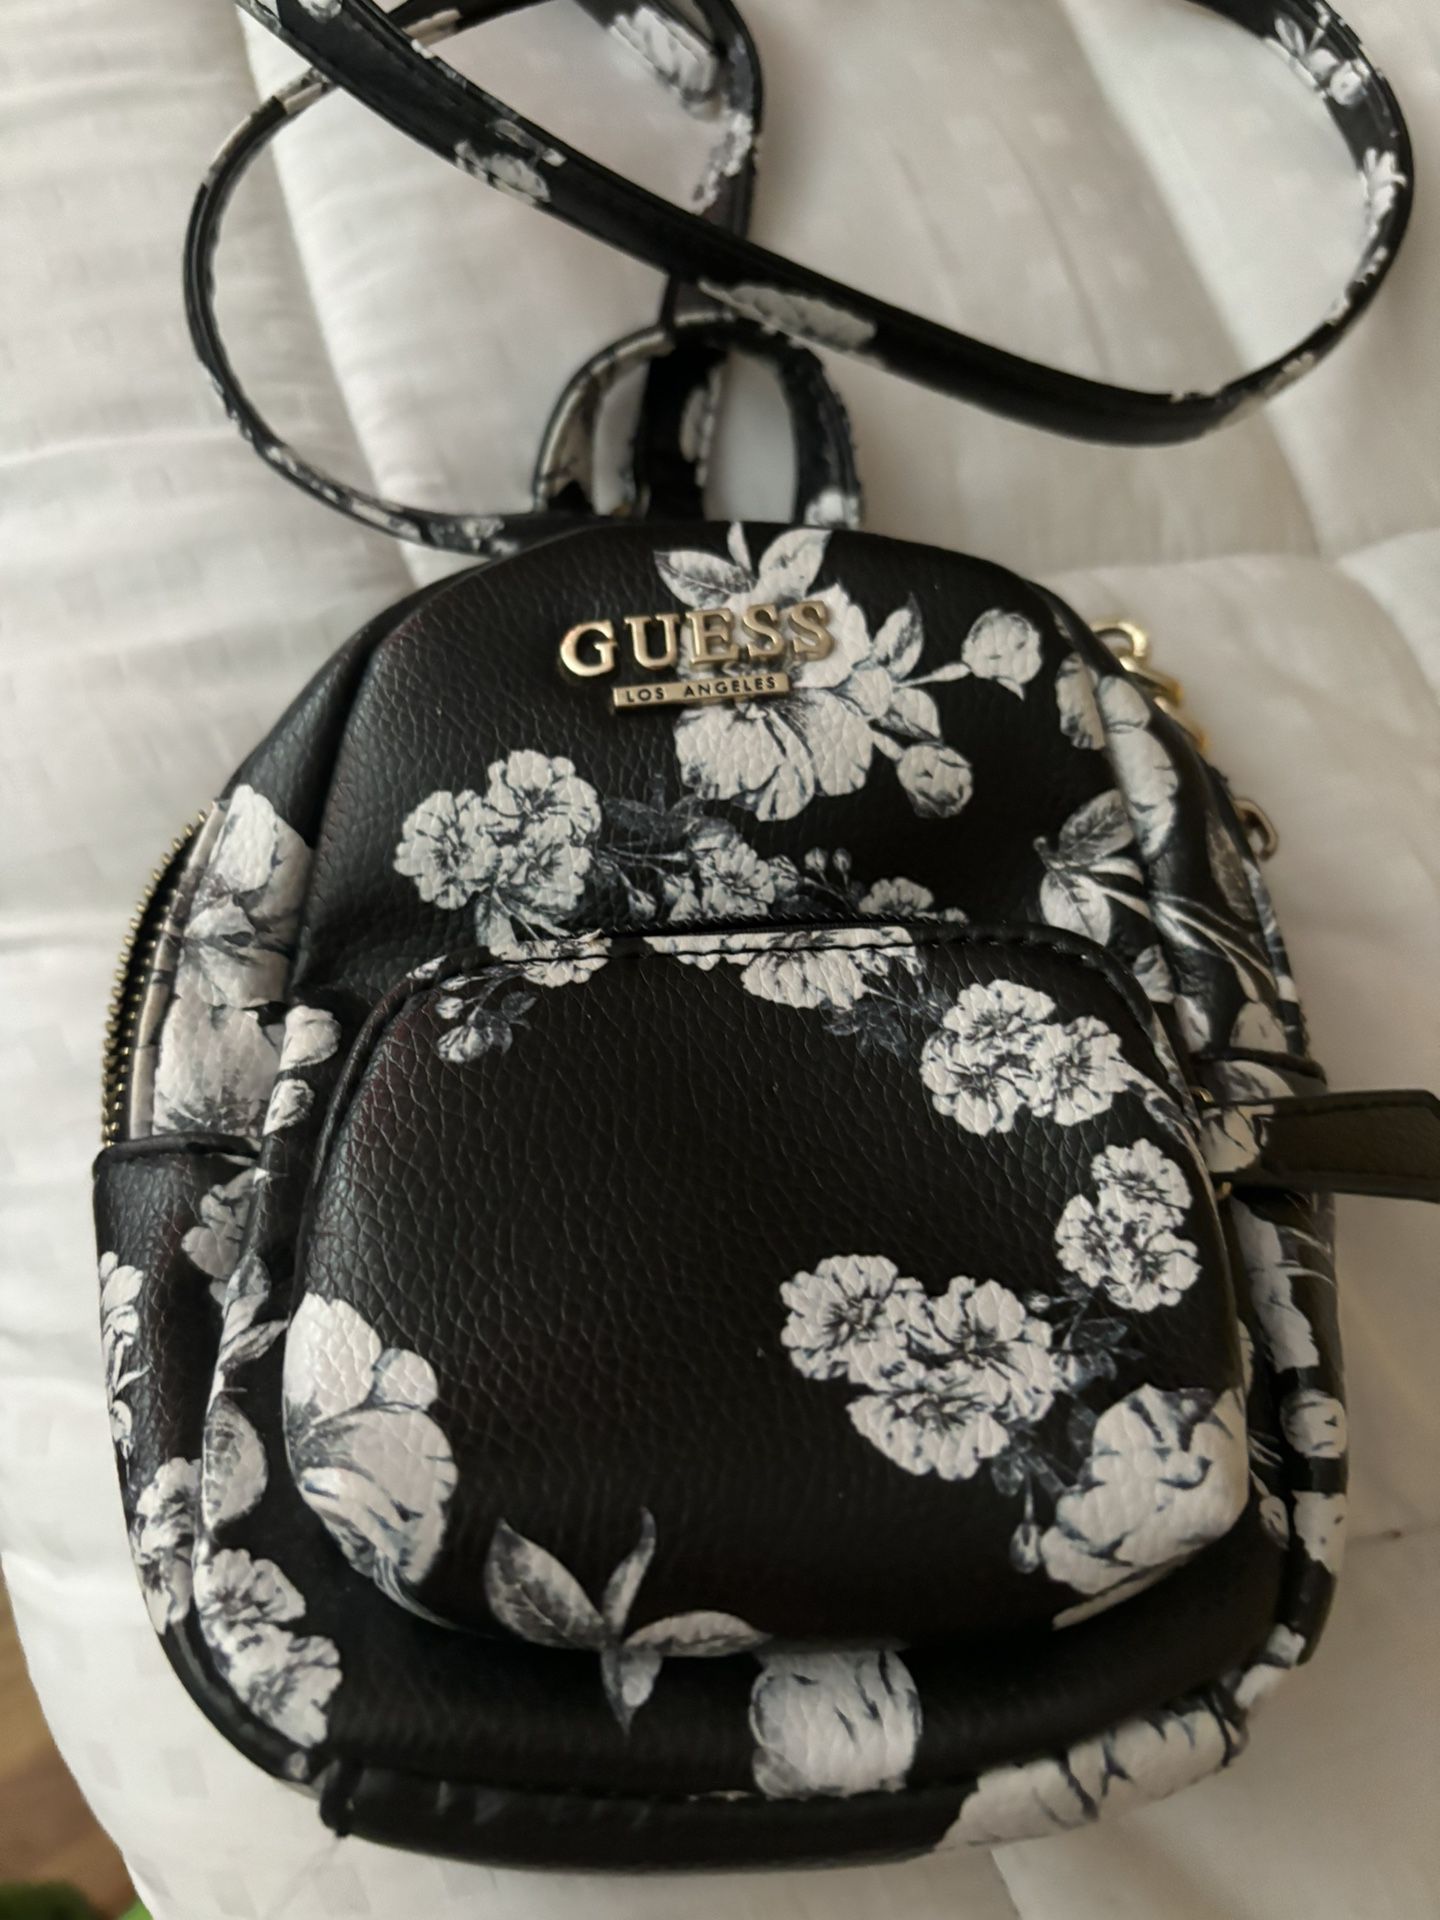 Guess - black and white